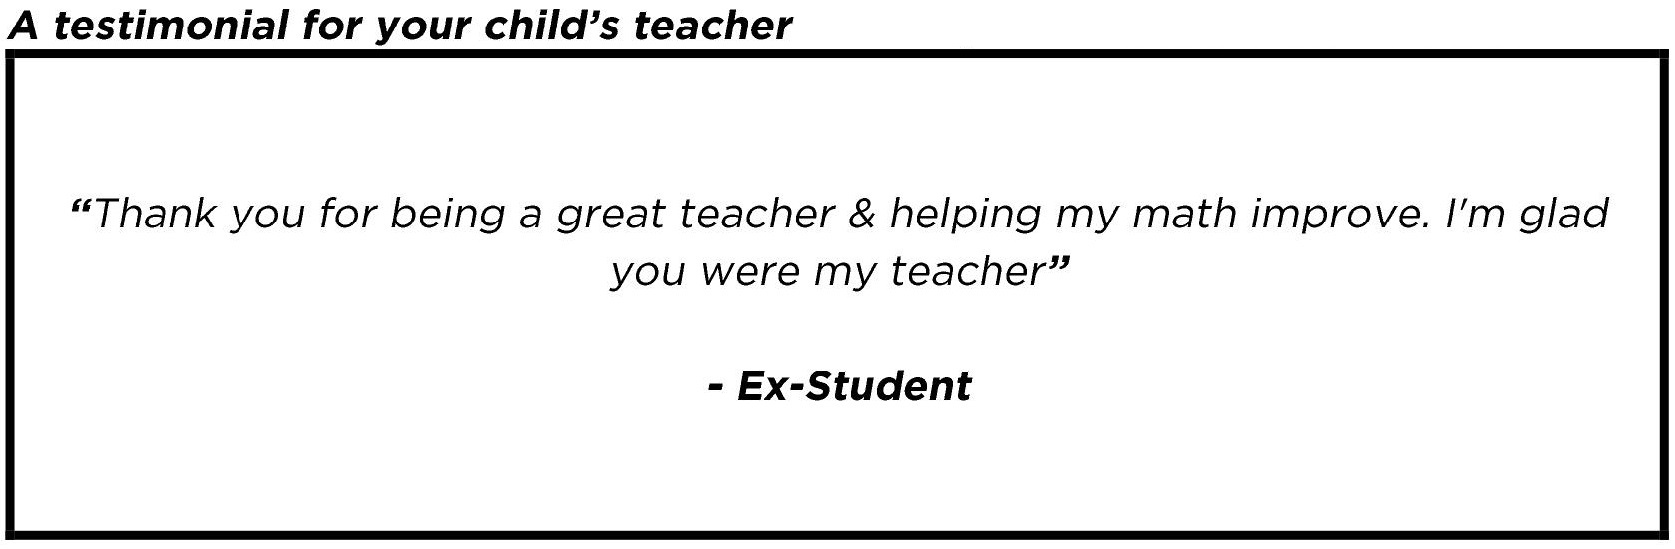 "Thank you for being a great teacher..."